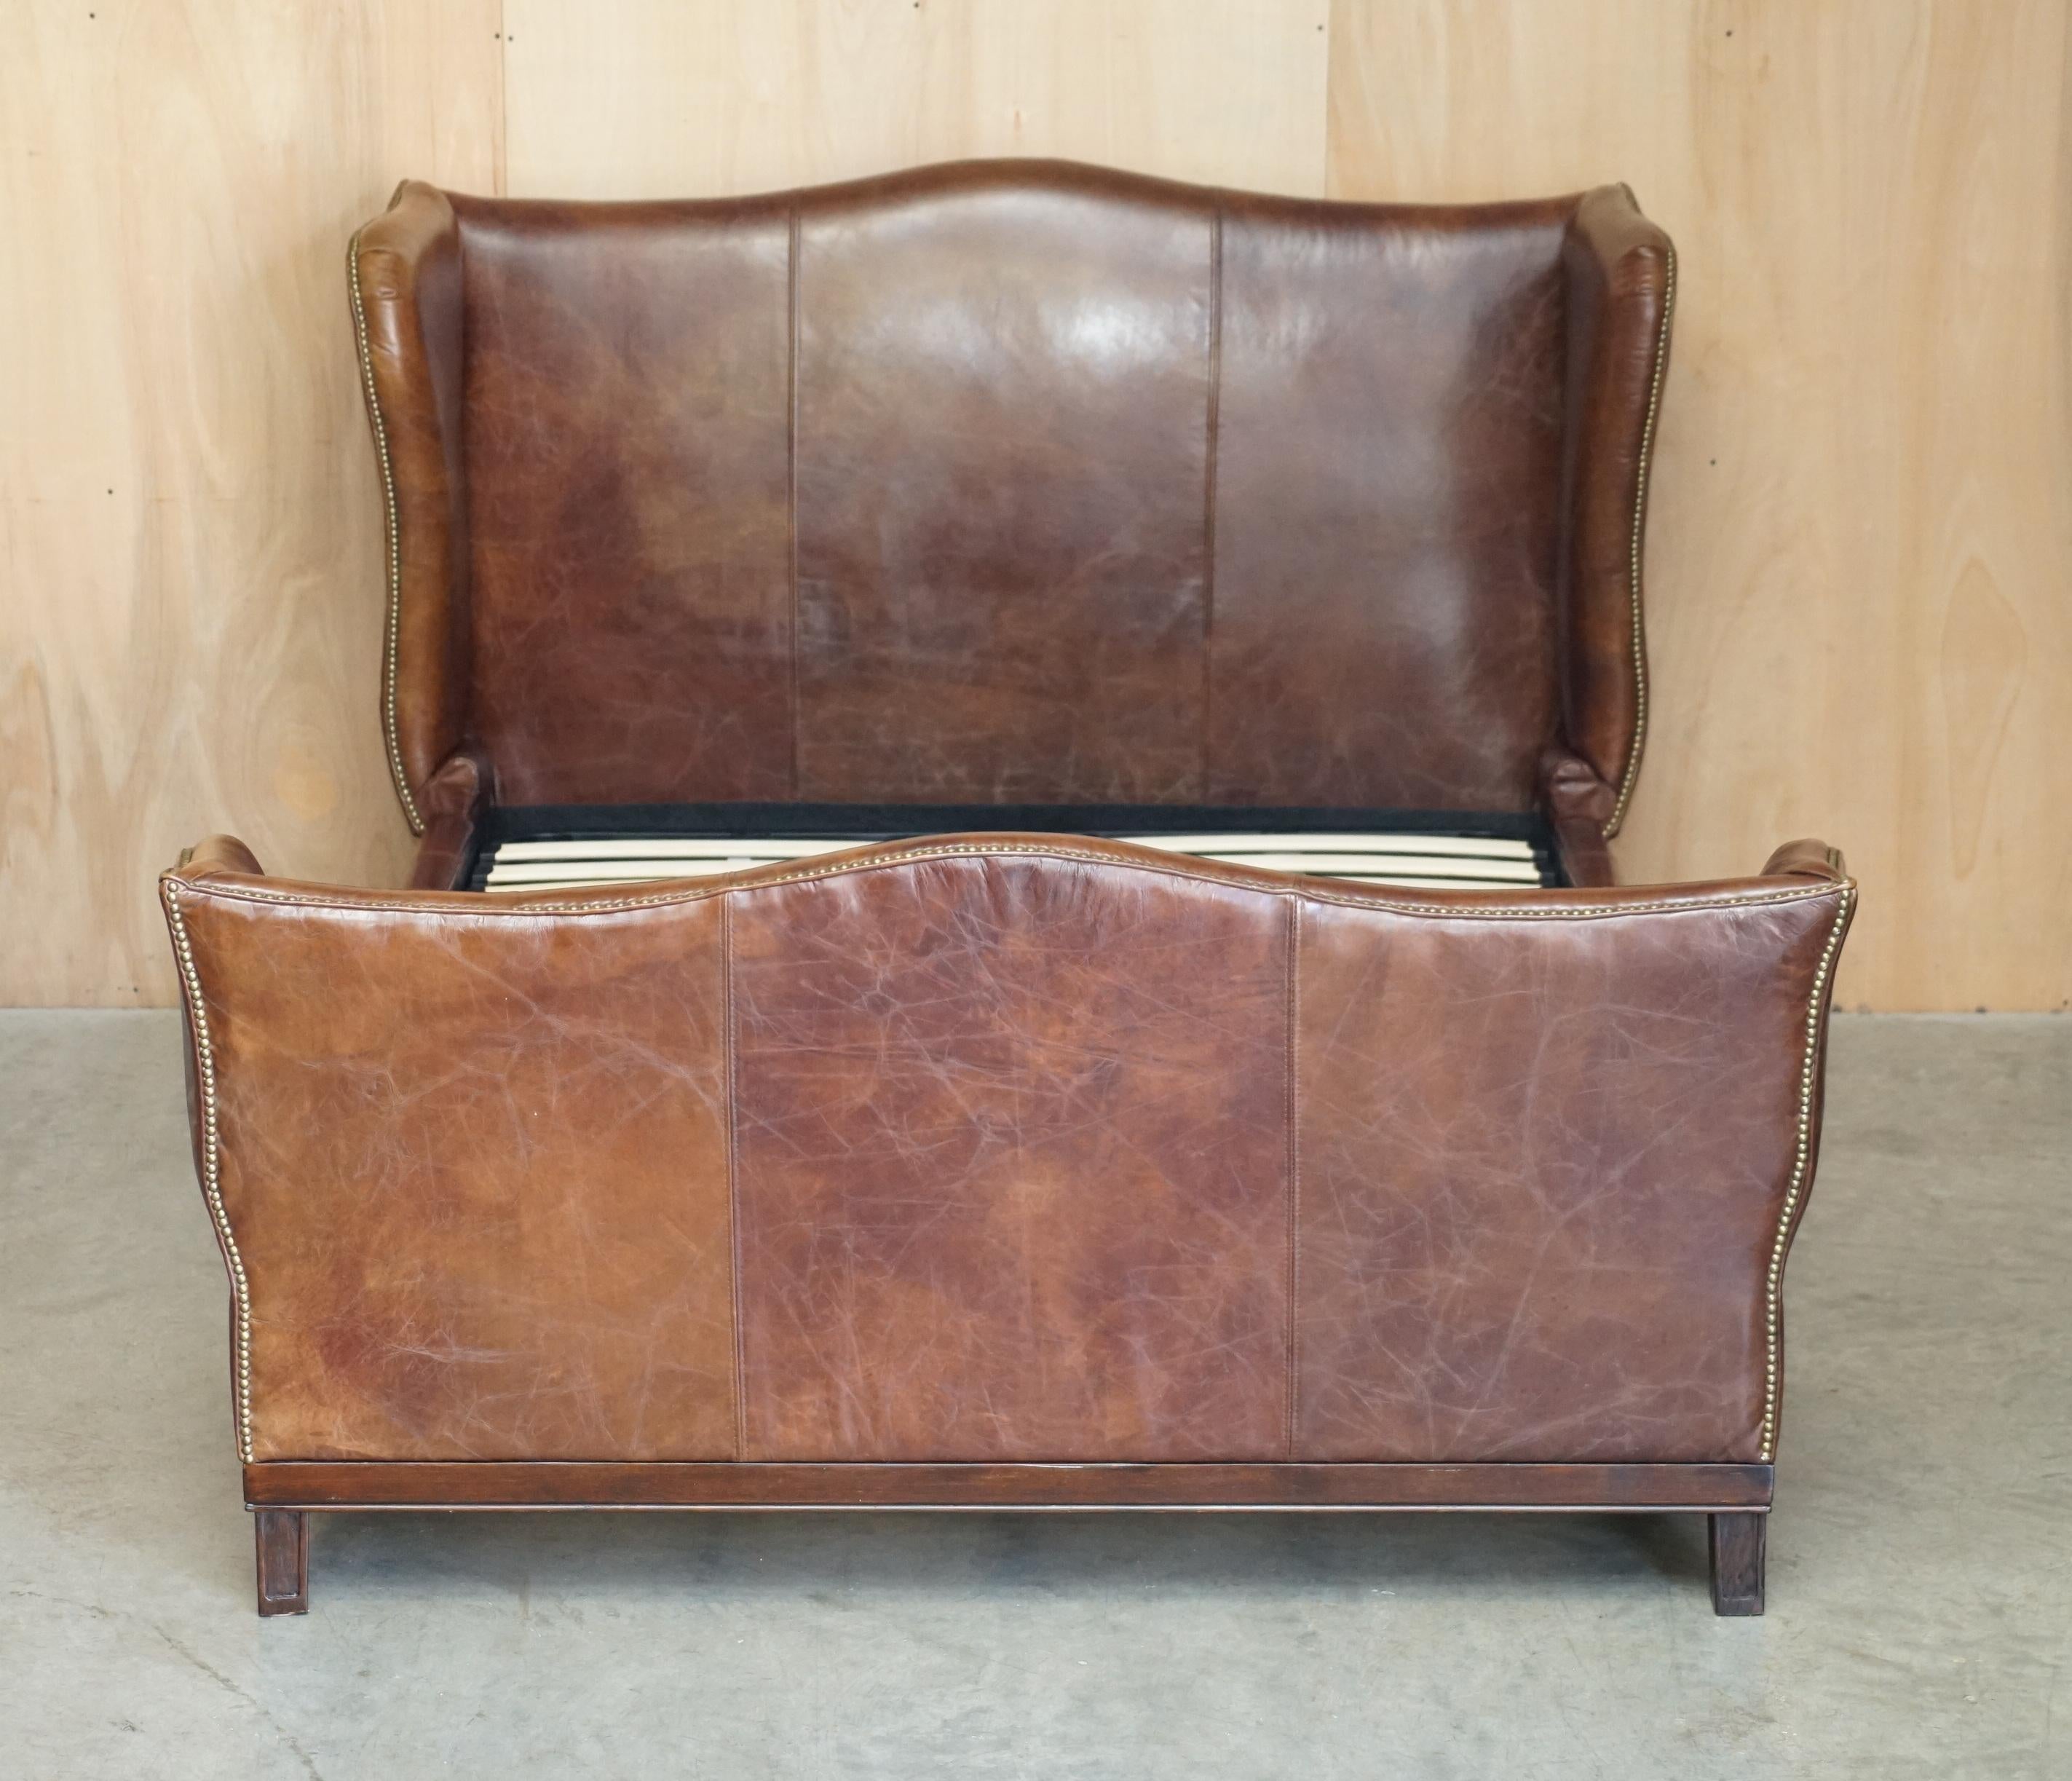 Royal House Antiques

Royal House Antiques is delighted to offer for sale this lovely, very rare hand dyed heritage brown leather wingback king size bed frame

Please note the delivery fee listed is just a guide, it covers within the M25 only for